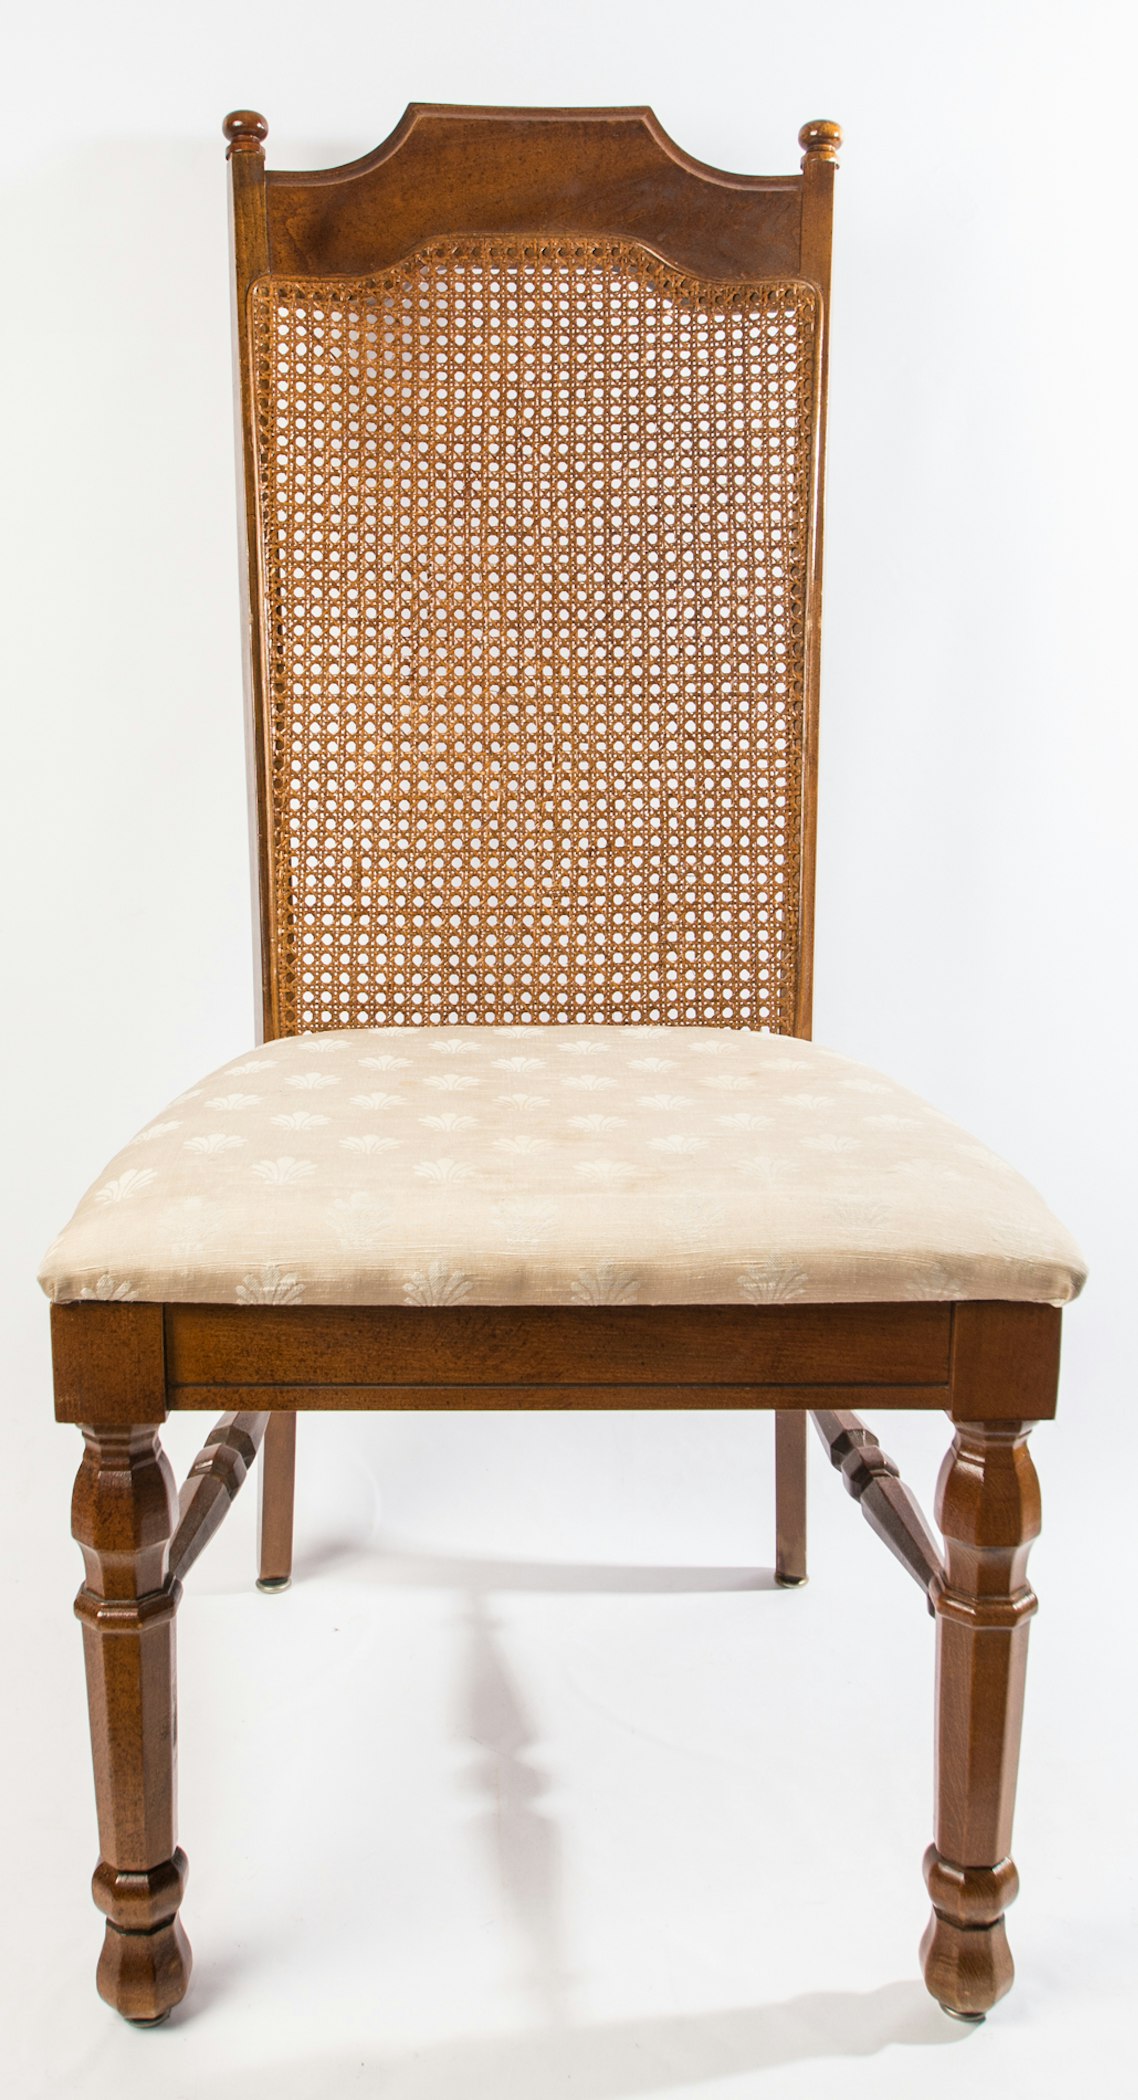 Vintage Broyhill Cane-Back Dining Chairs | EBTH